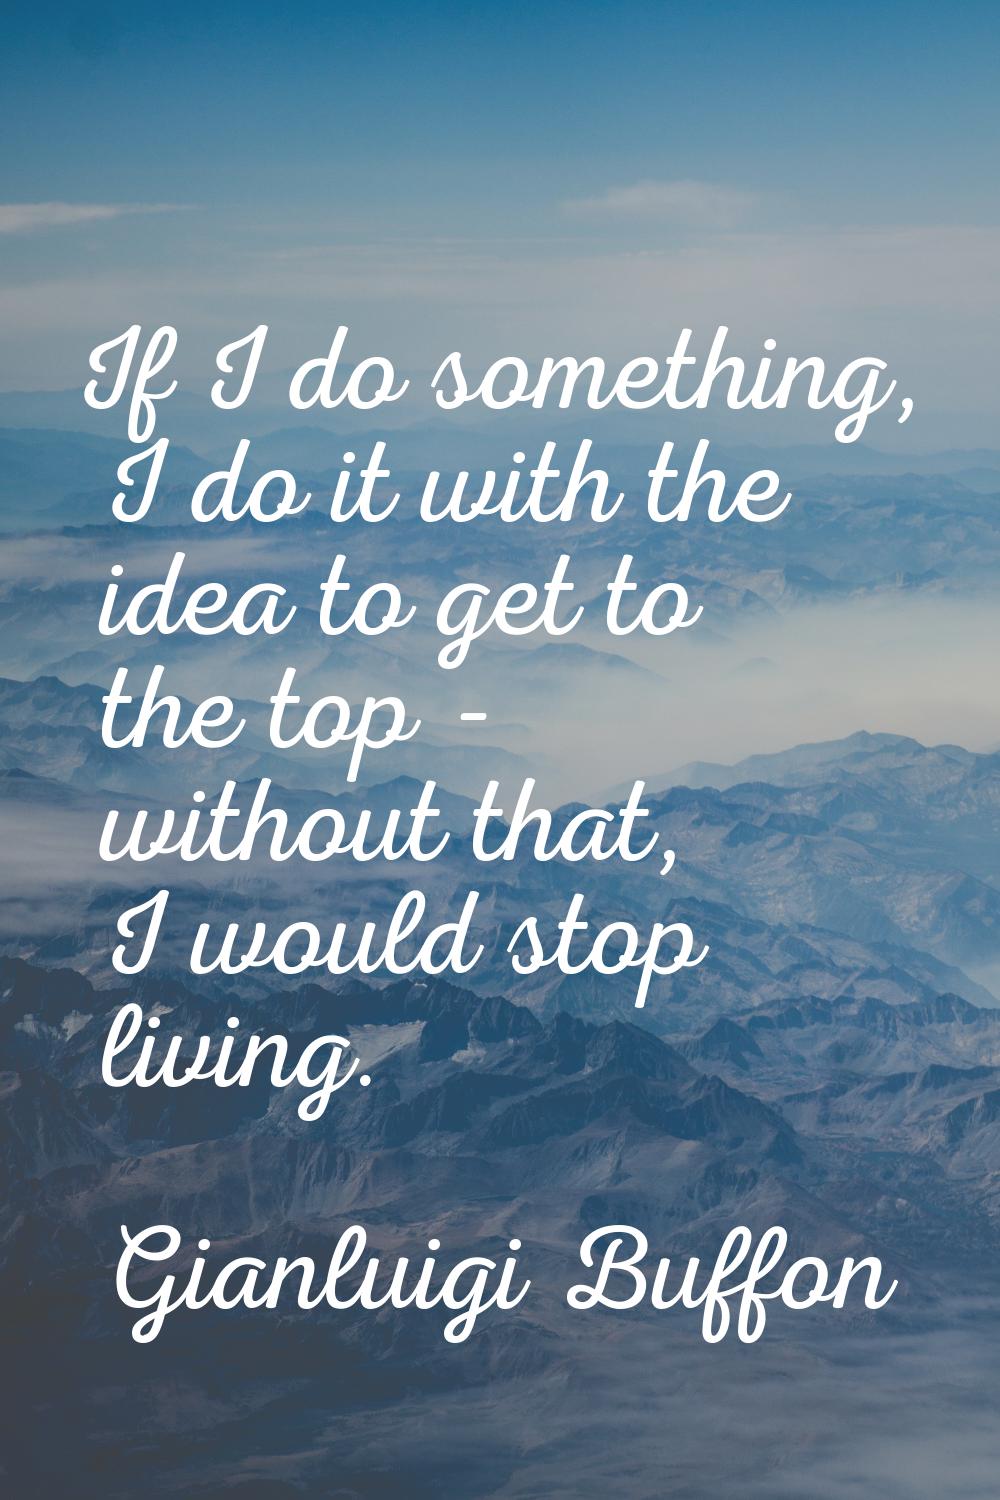 If I do something, I do it with the idea to get to the top - without that, I would stop living.